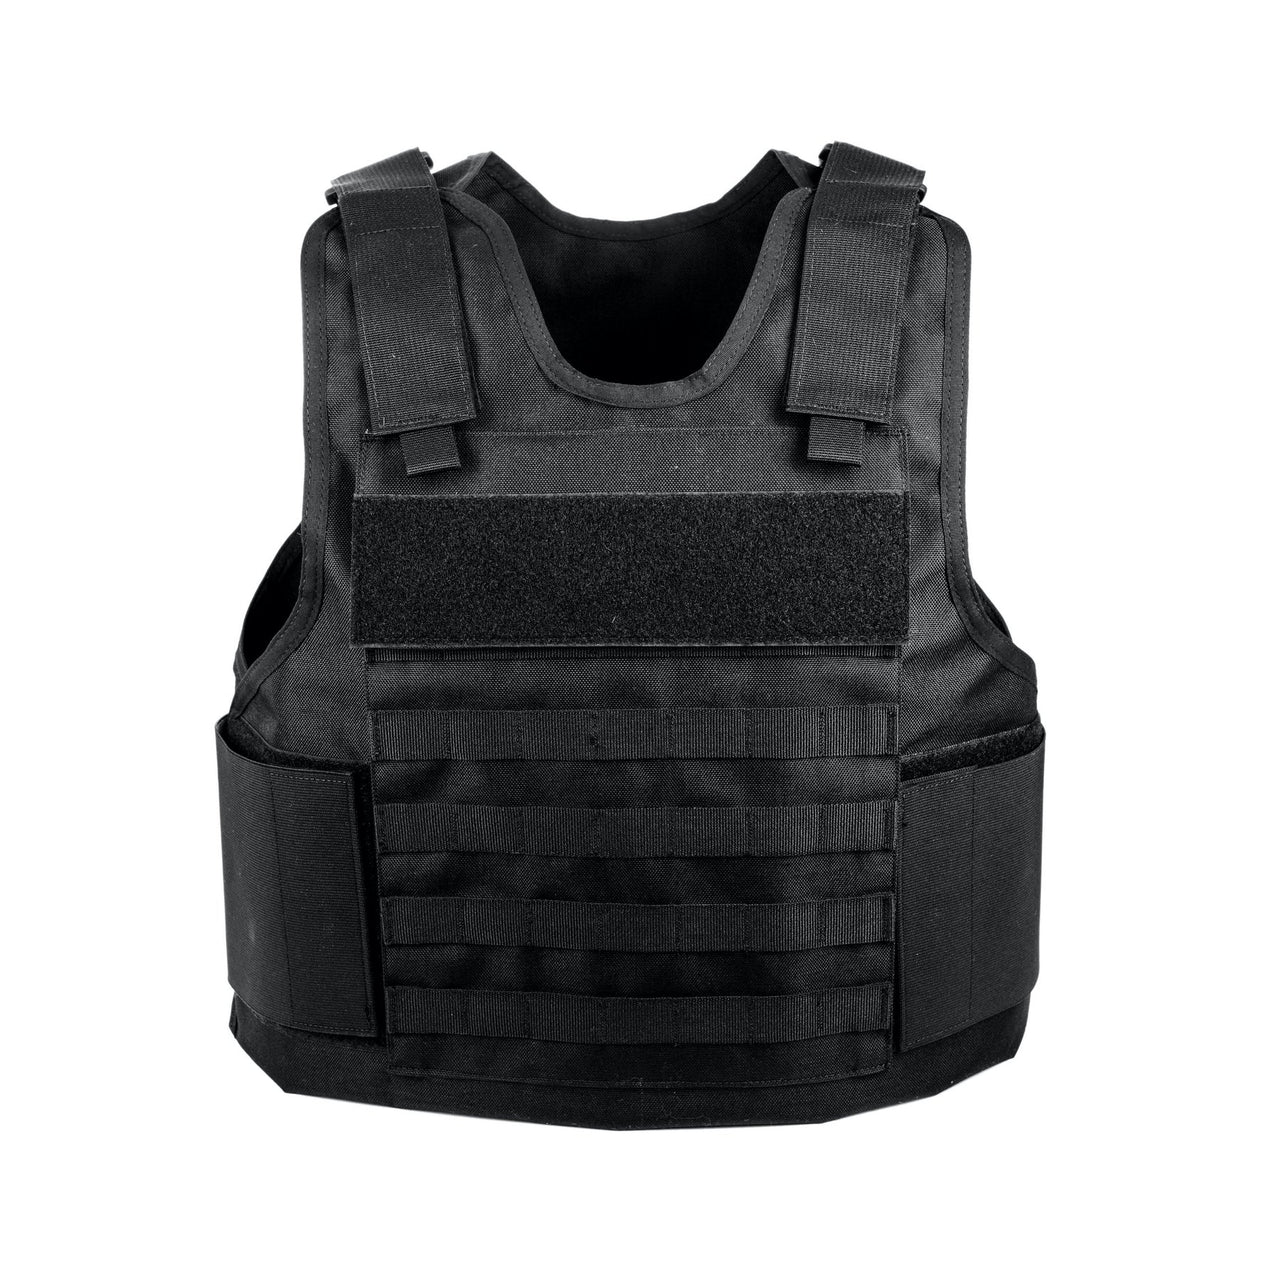 A Body Armor Direct All Star Tactical Outer Carrier vest on a white background.